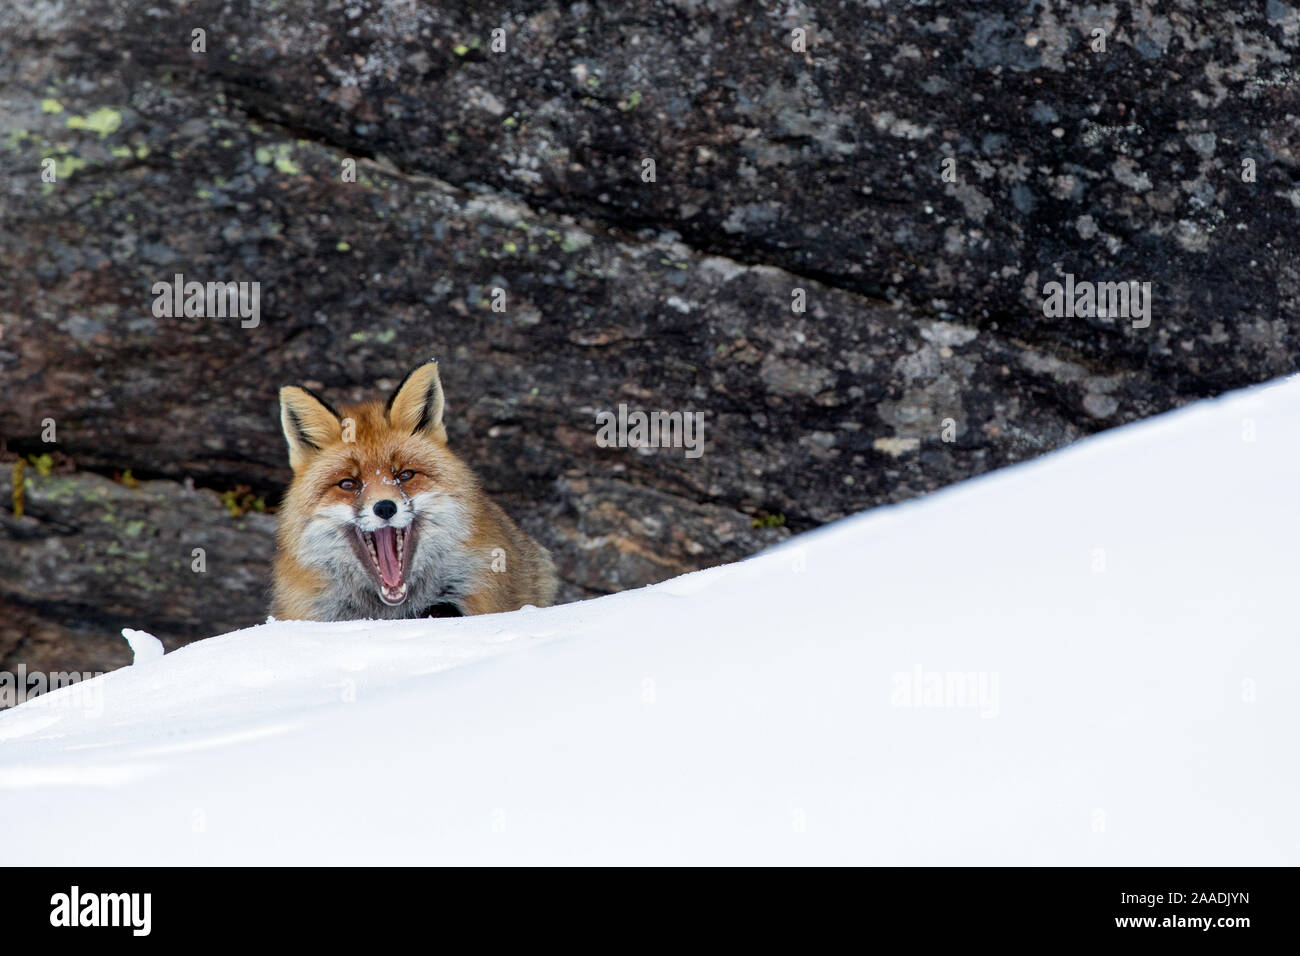 European red fox (Vulpes vulpes crucigera) in deep snow in front of steep rocks. Gran Paradiso National Park, Italy. December Highly commended in the Portfolio category of the Terre Sauvage Nature Images Awards 2017. Stock Photo